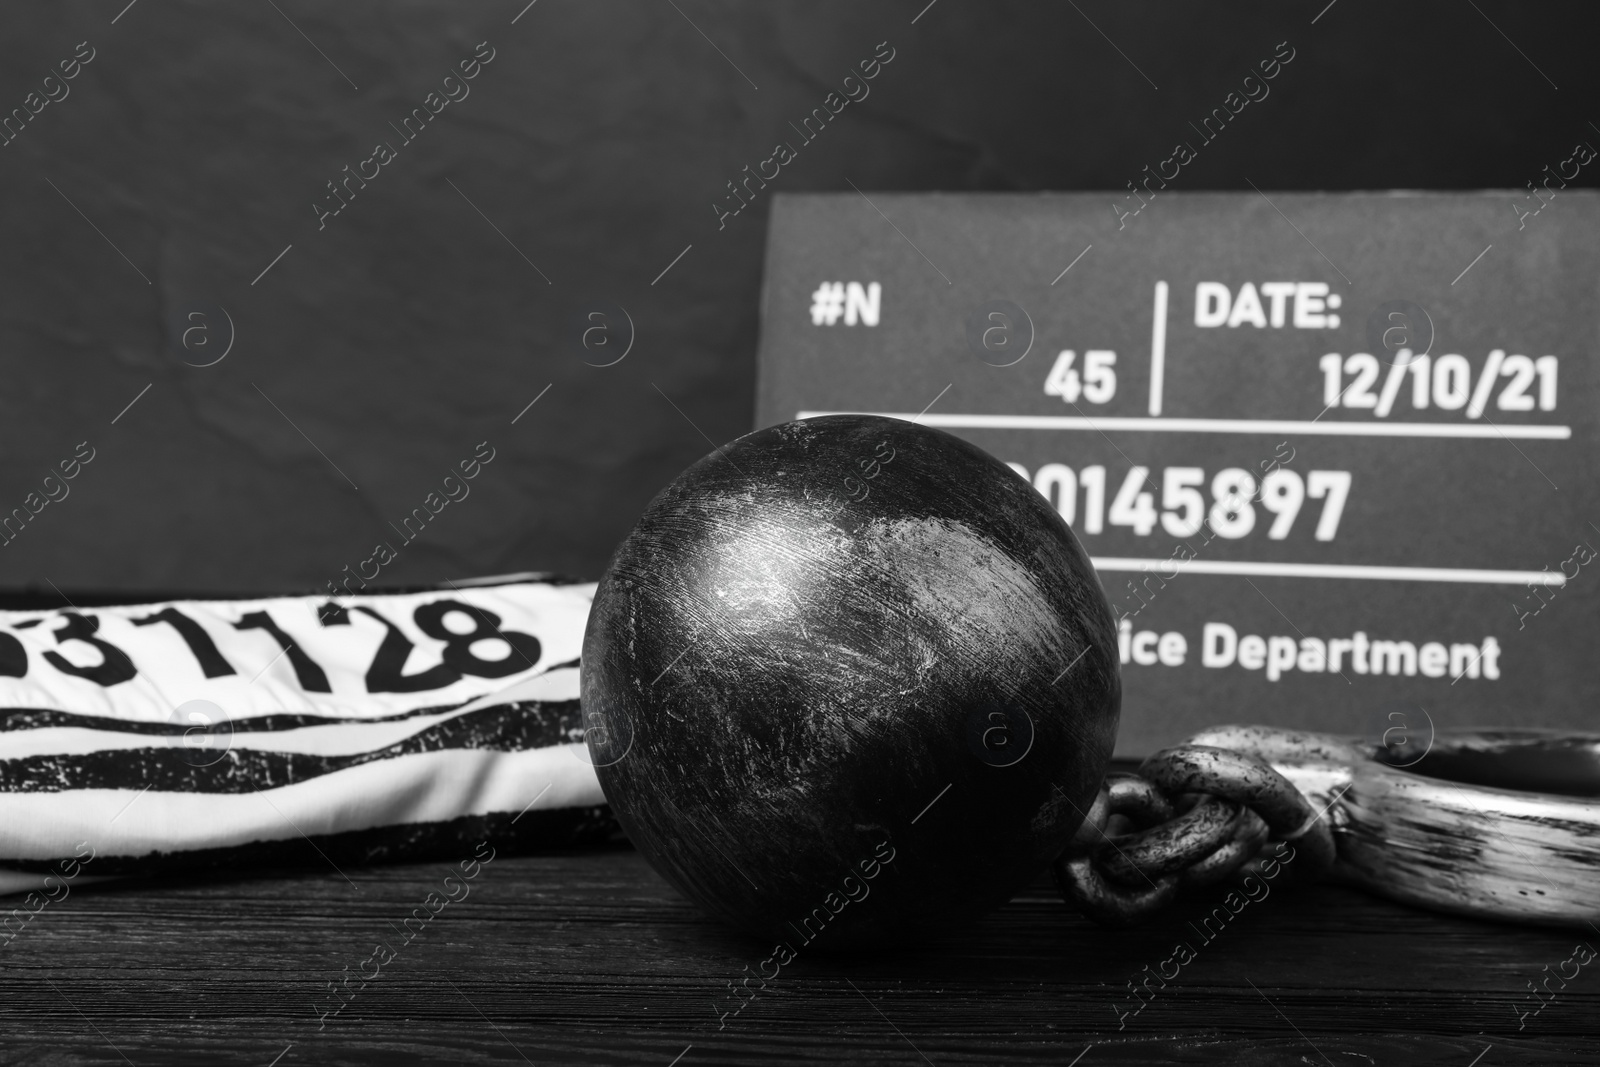 Photo of Metal ball with chain, prison uniform and mugshot letter board on black wooden table